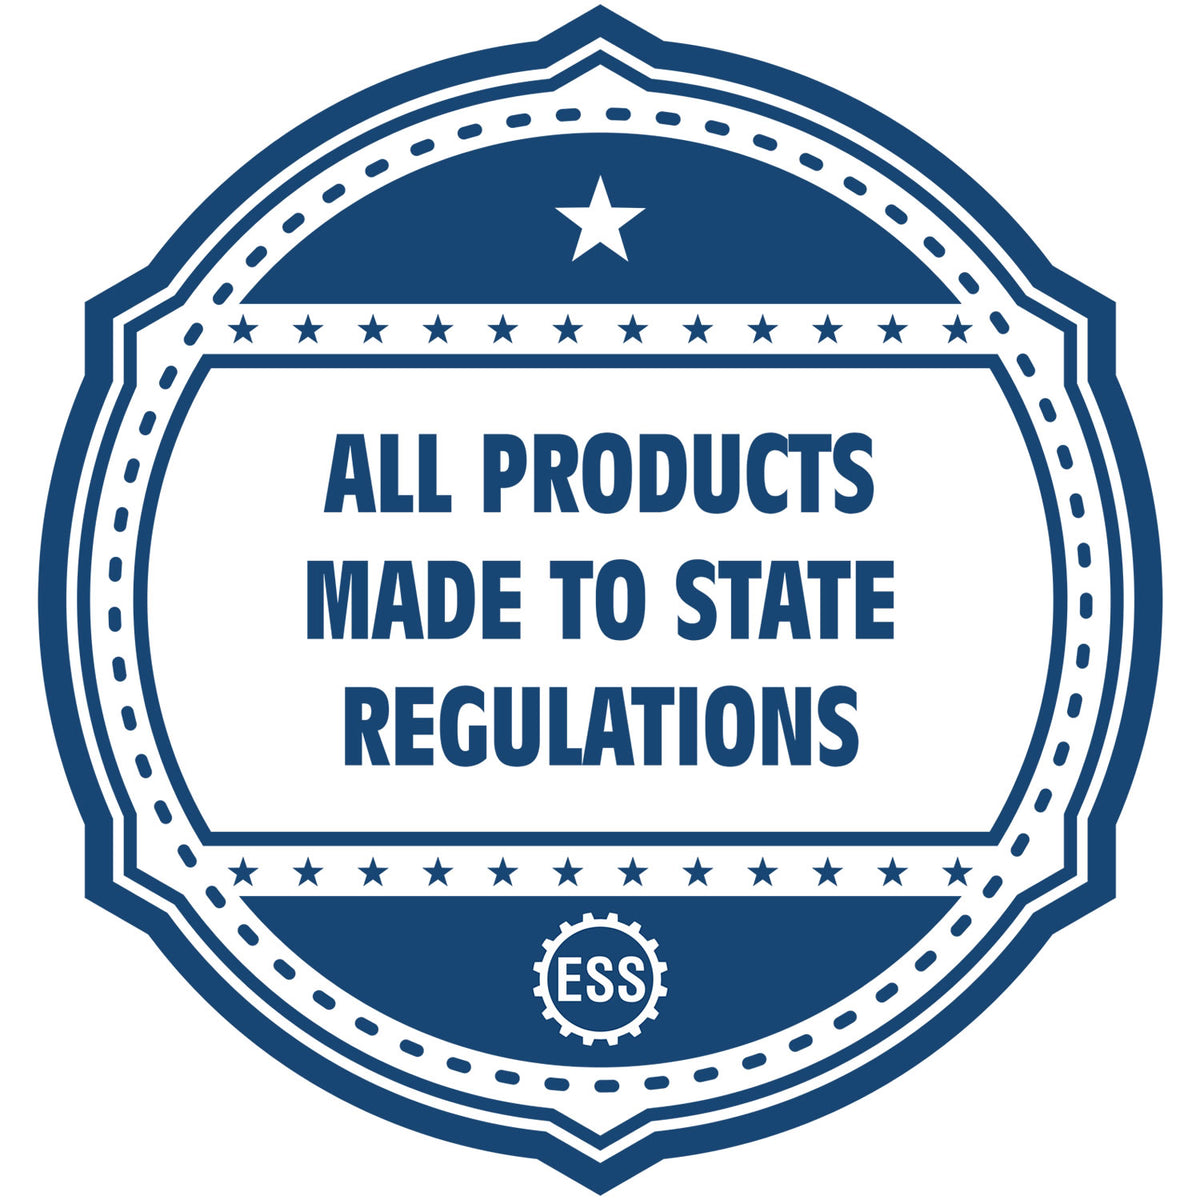 An icon or badge element for the Louisiana Landscape Architectural Seal Stamp showing that this product is made in compliance with state regulations.